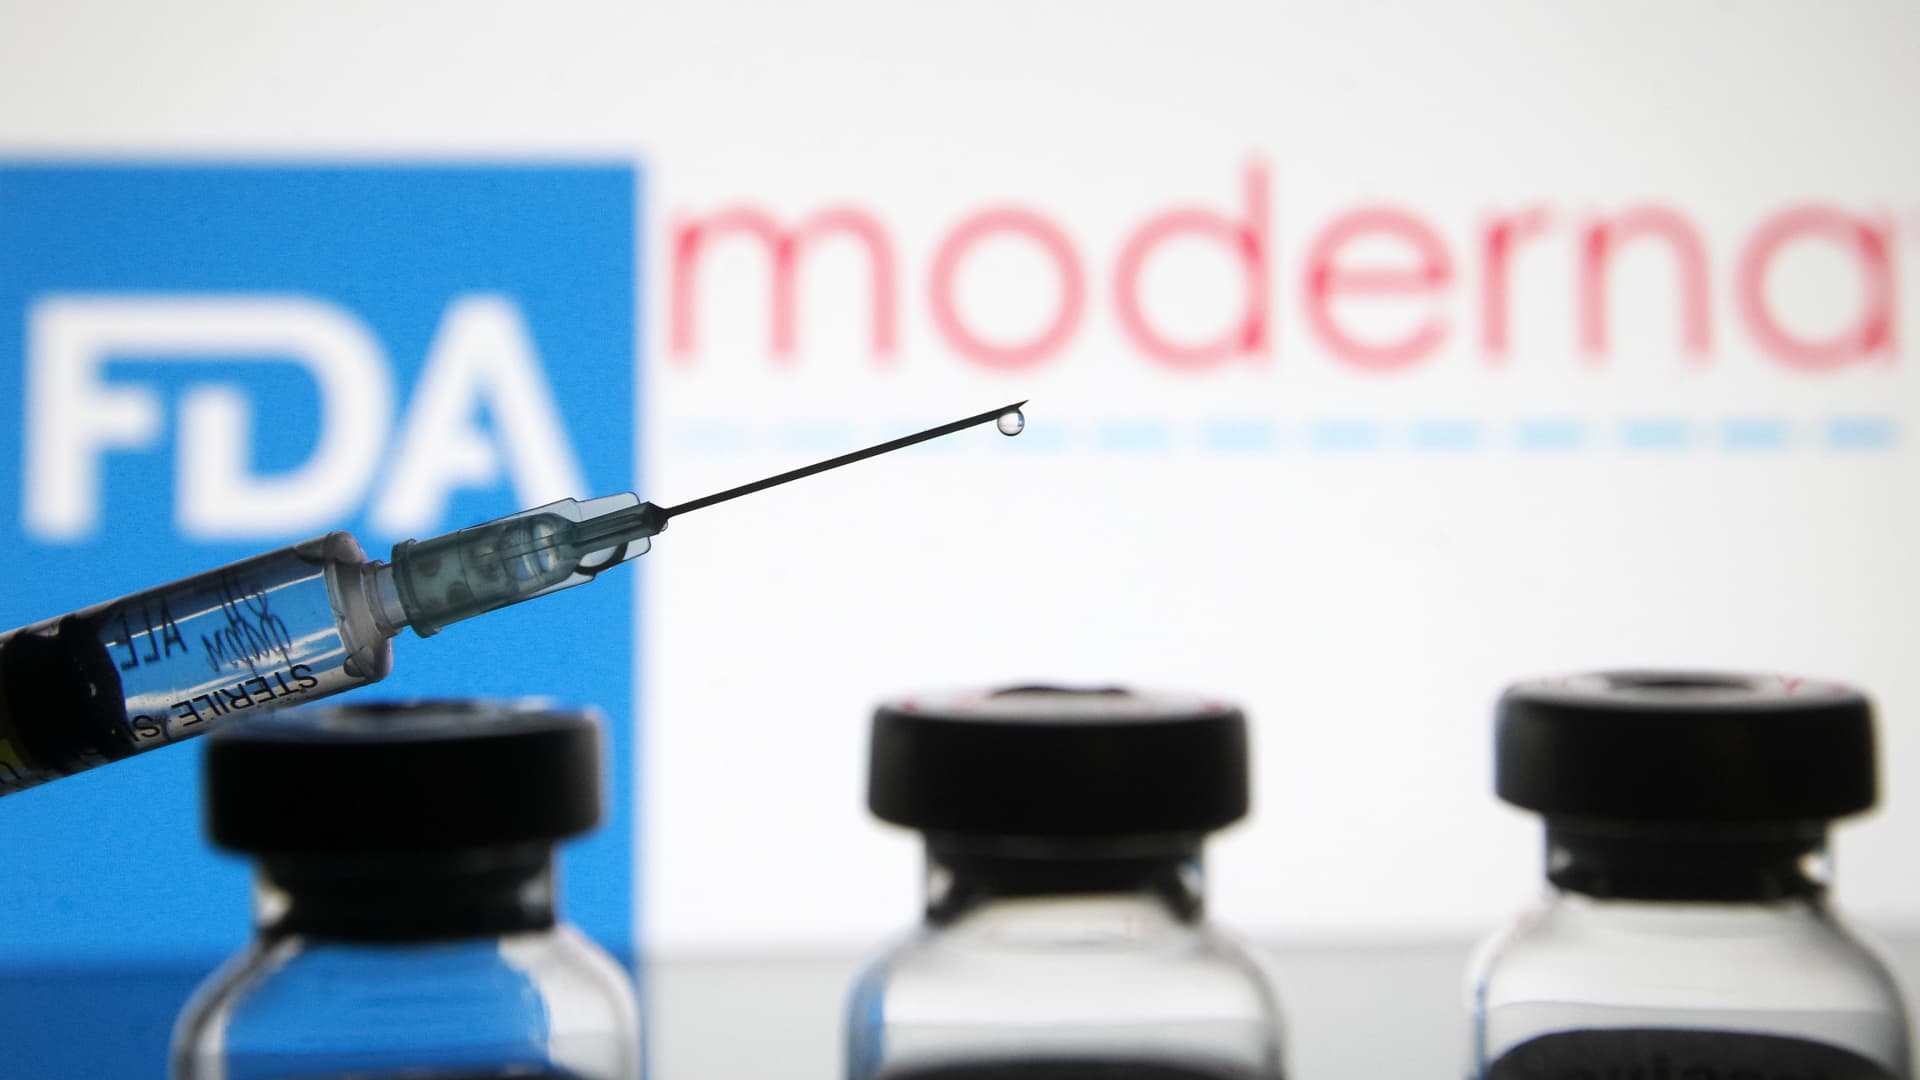 Vials and a medical syringe seen displayed in front of the Food and Drug Administration (FDA) of the United States and Moderna biotechnology company's logos. FDA finds the COVID-19 vaccine.